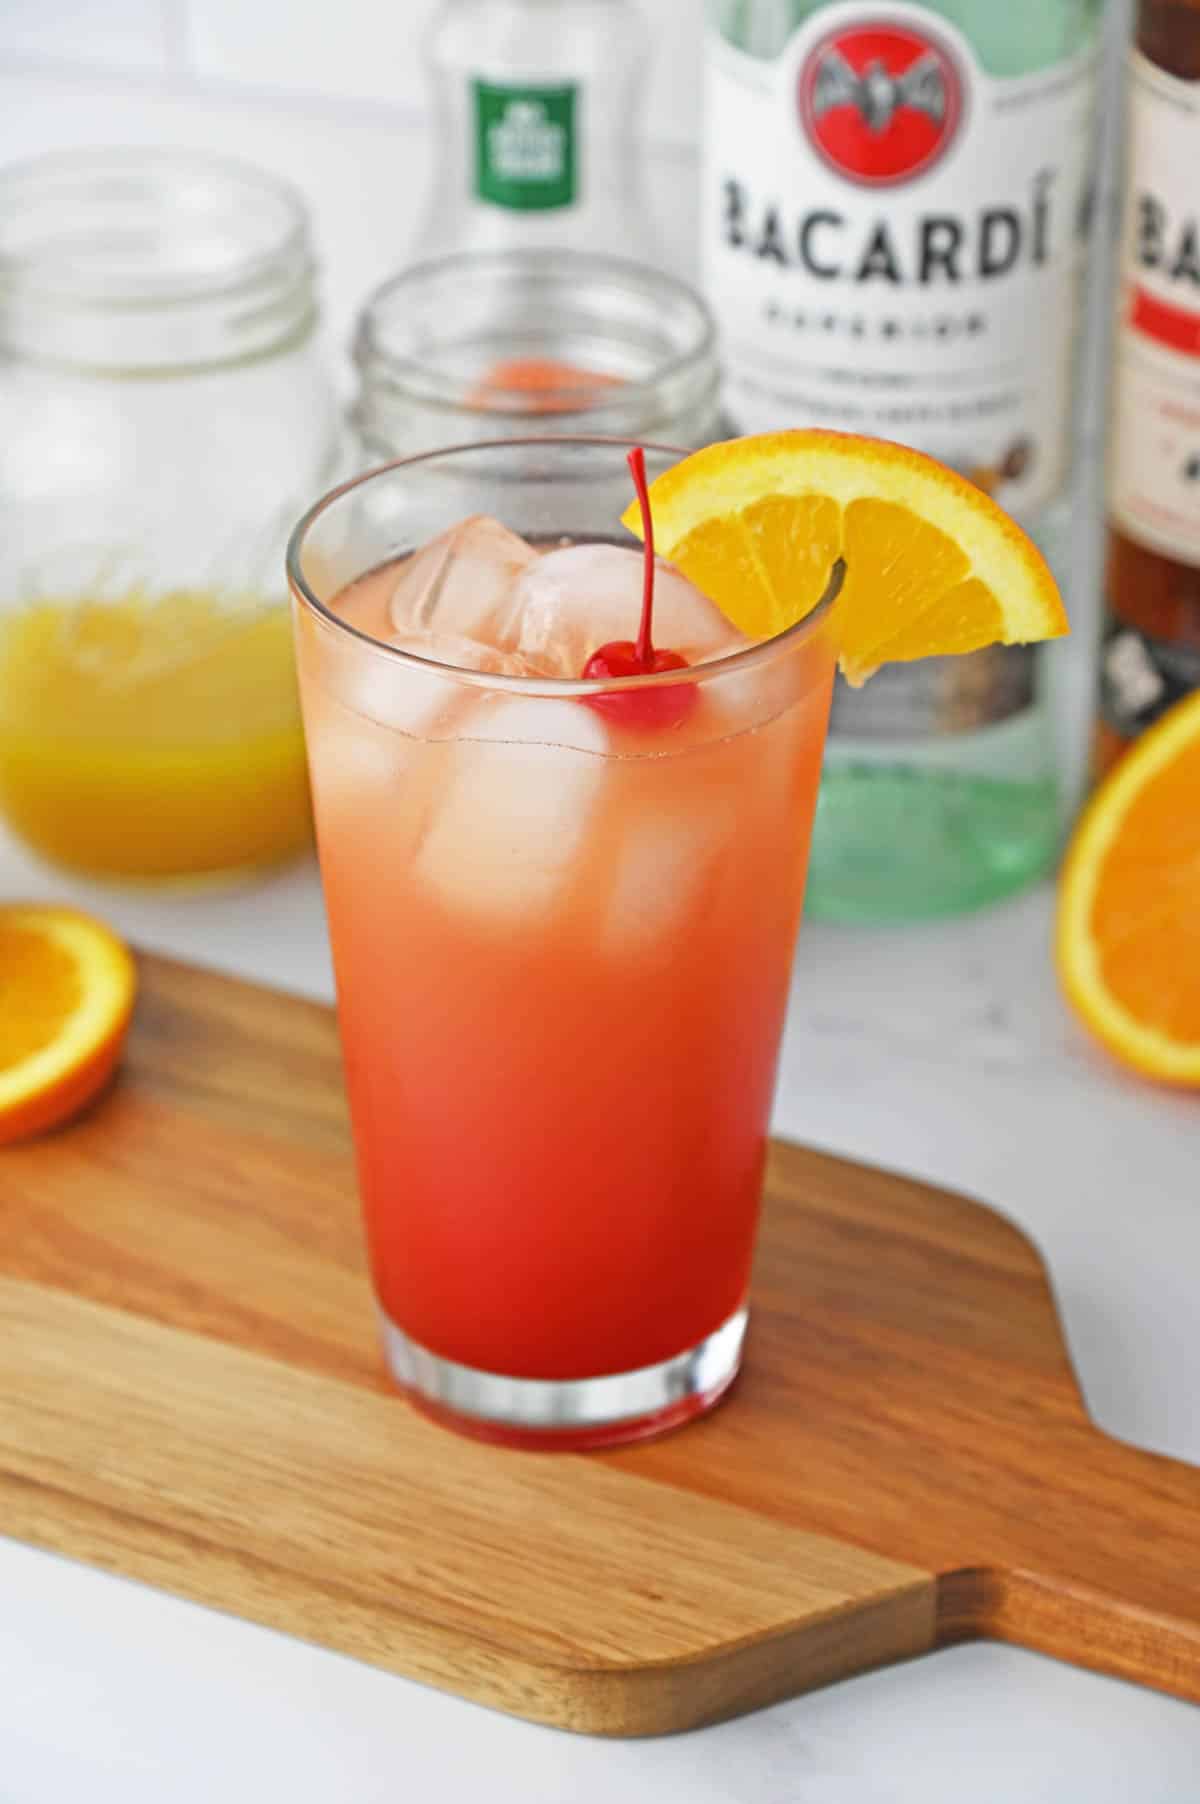 A tropical drink served in a tall glass with cherries and orange slices.